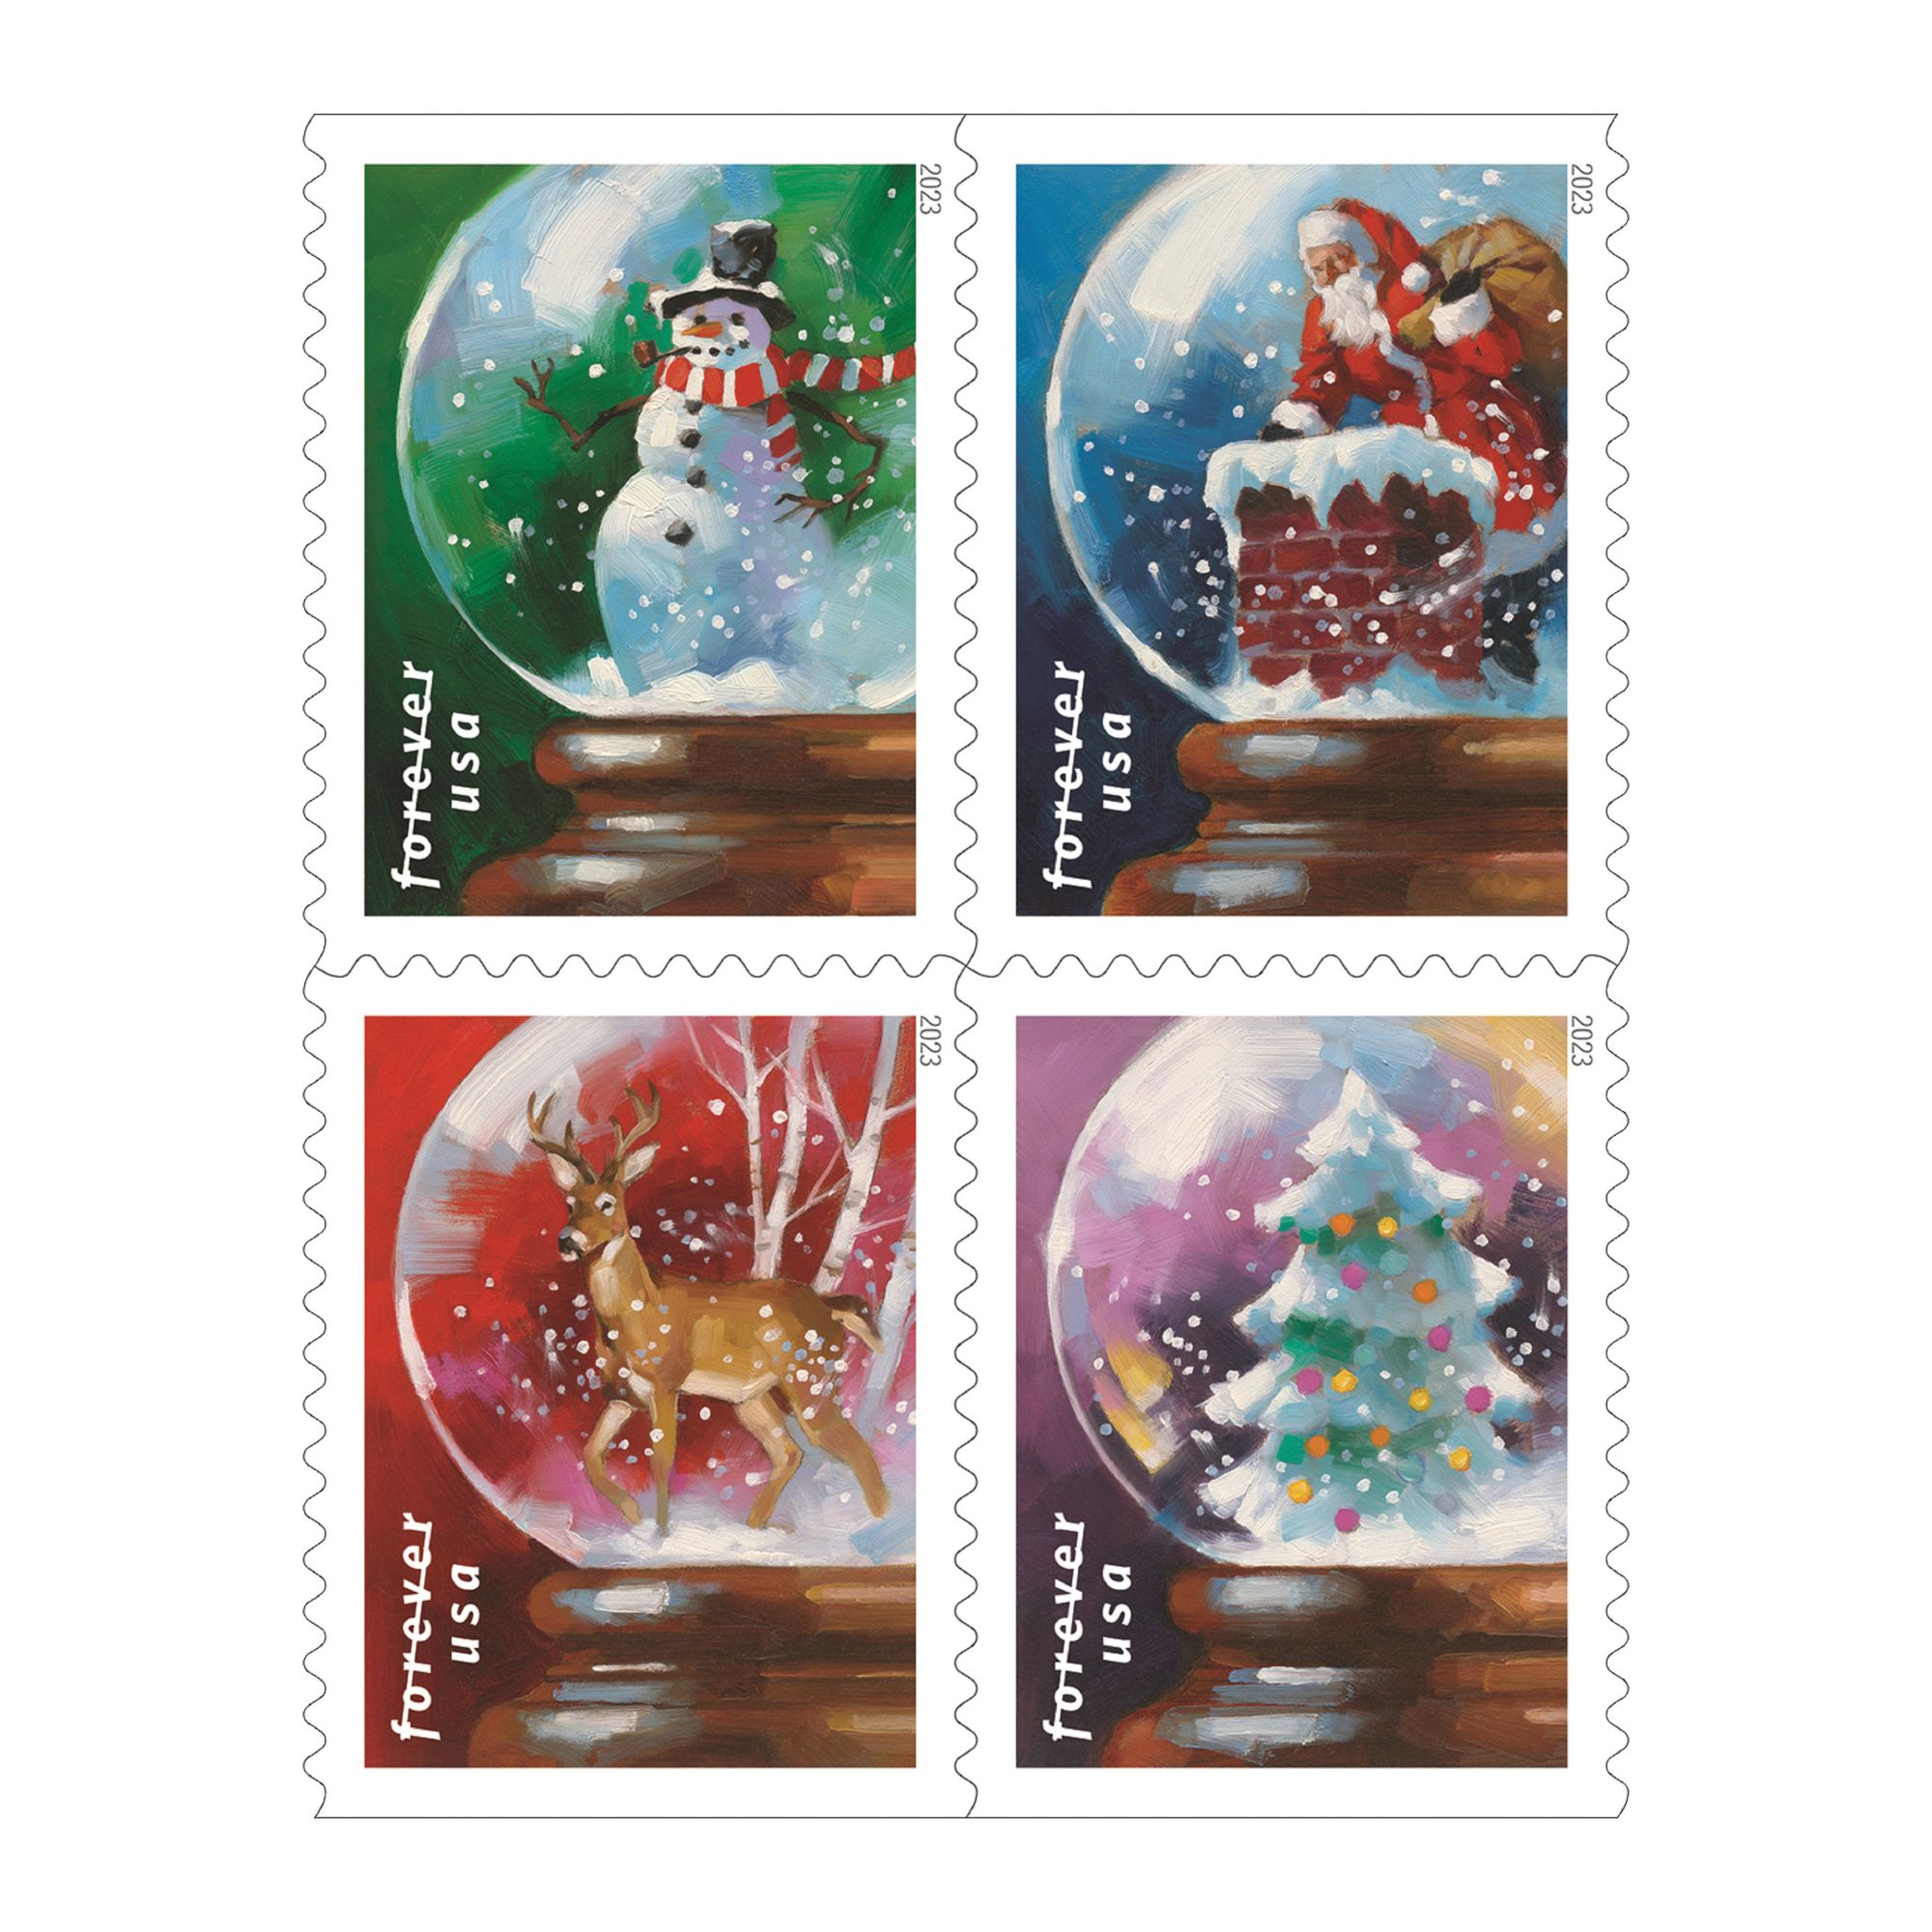 80 Snowy Day Forever Stamps Real stamps use ink - Depop